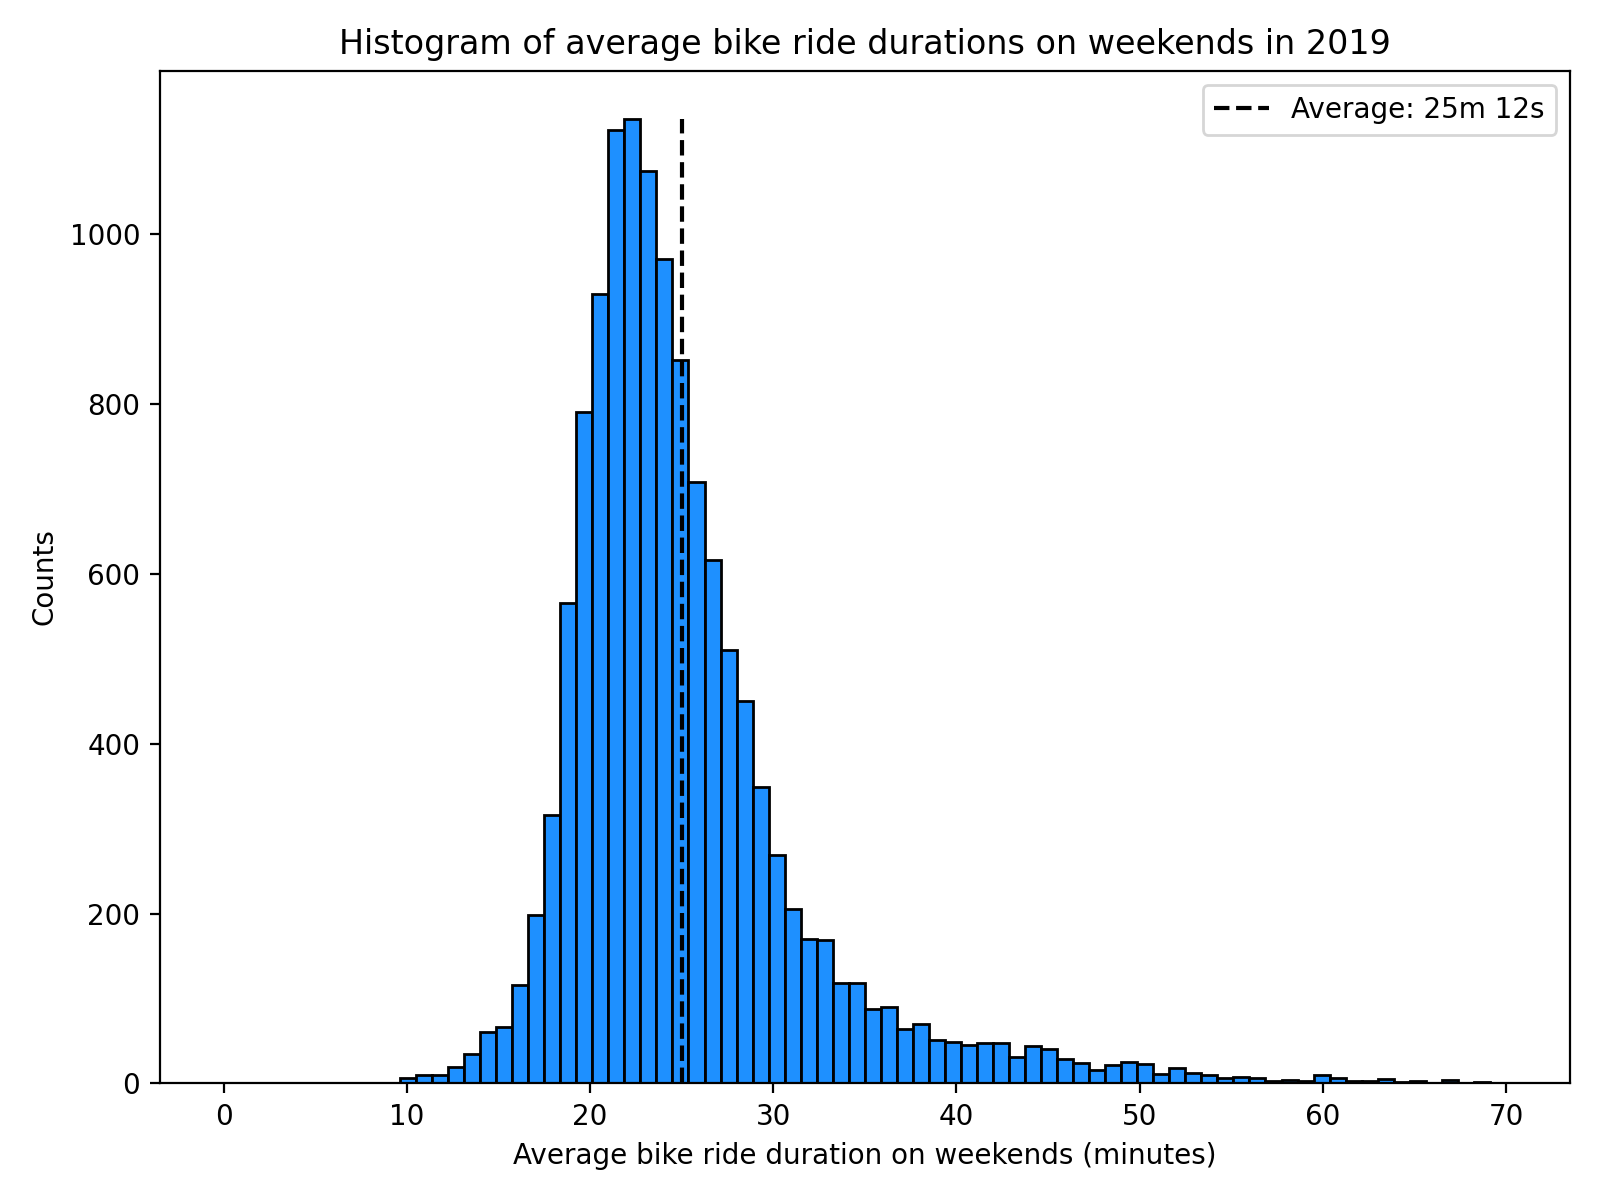 Histogram of average bike ride duration on weekends in 2019